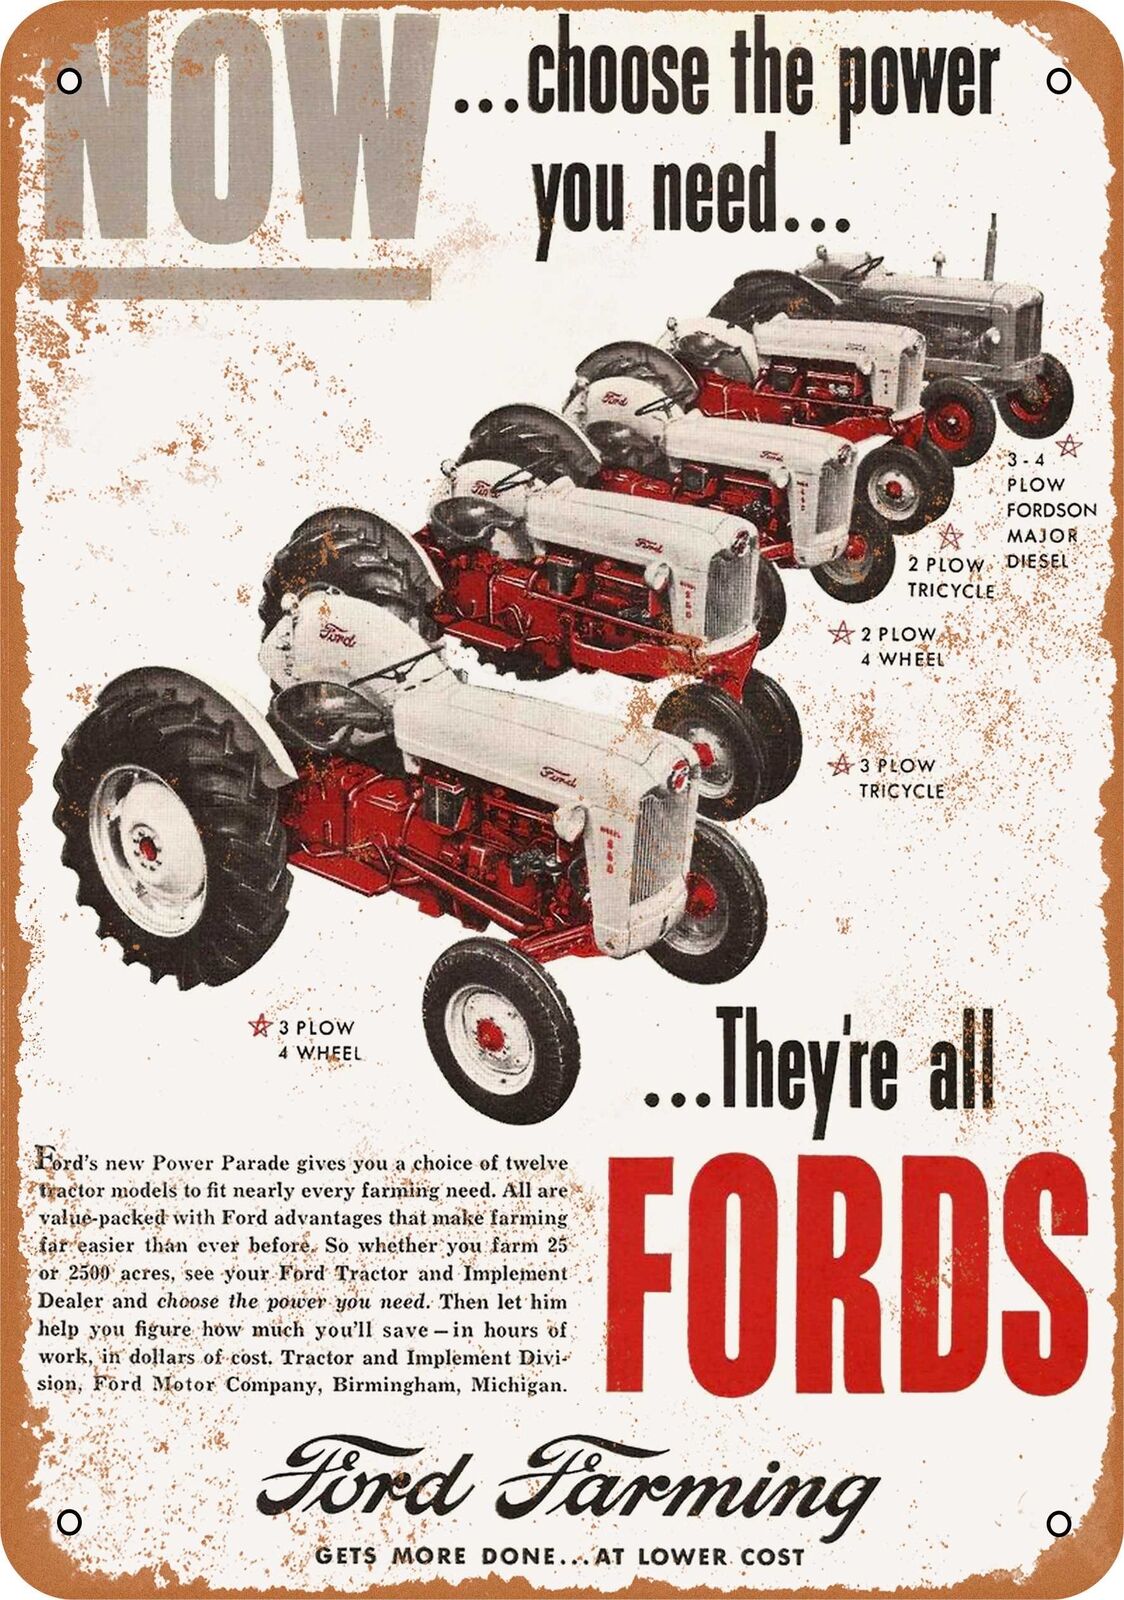 Metal Sign - 1955 Ford Farming Tractors - Vintage Look Reproduction